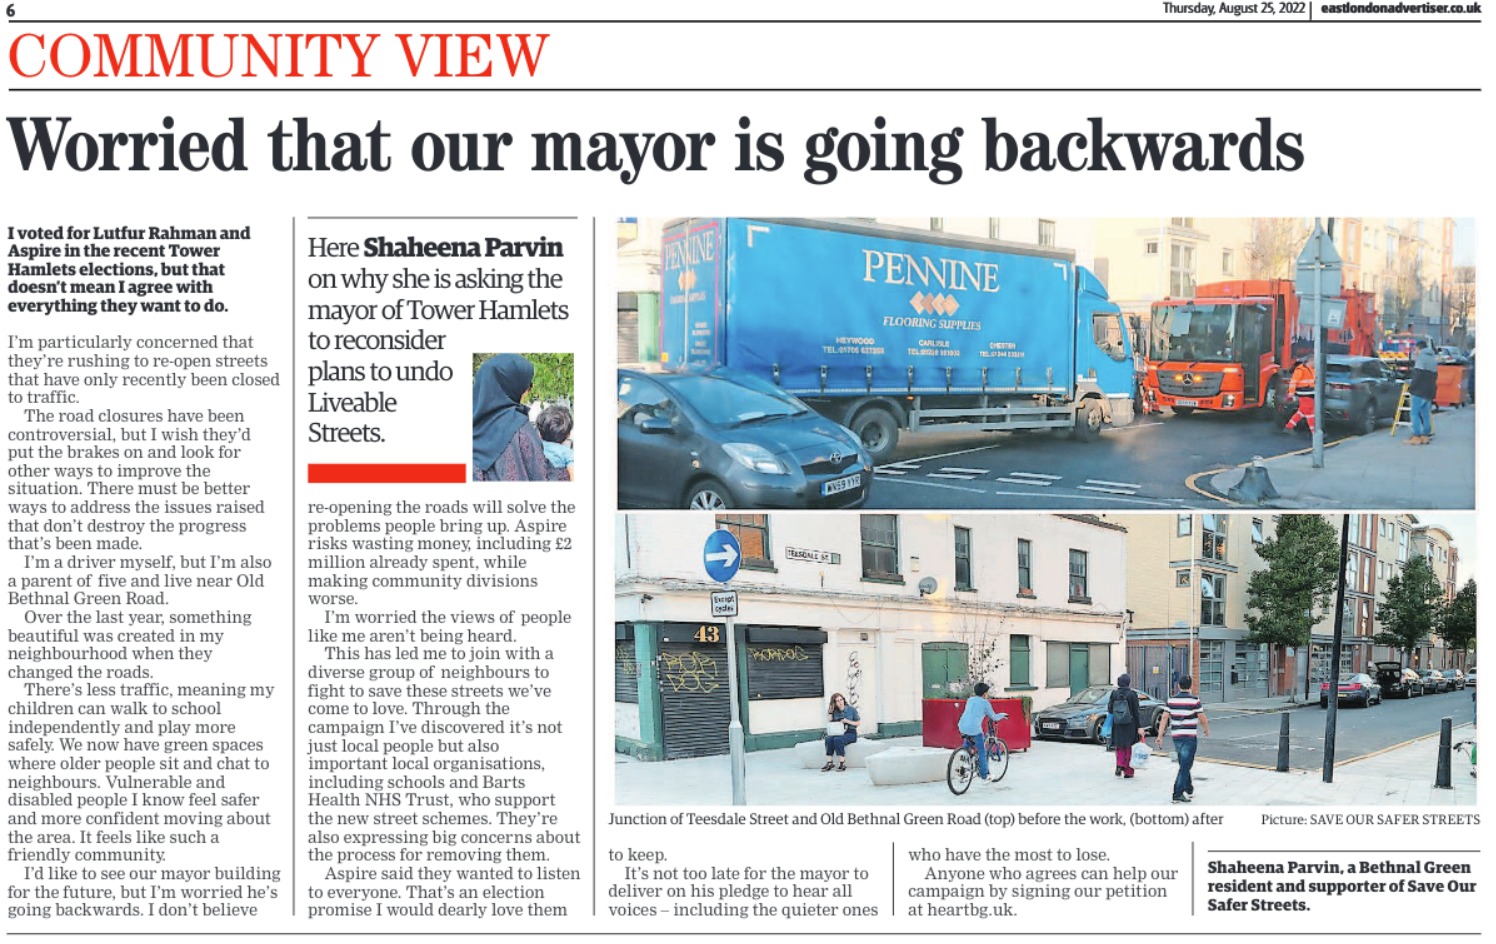 Copy of East London Advertiser Community View article.